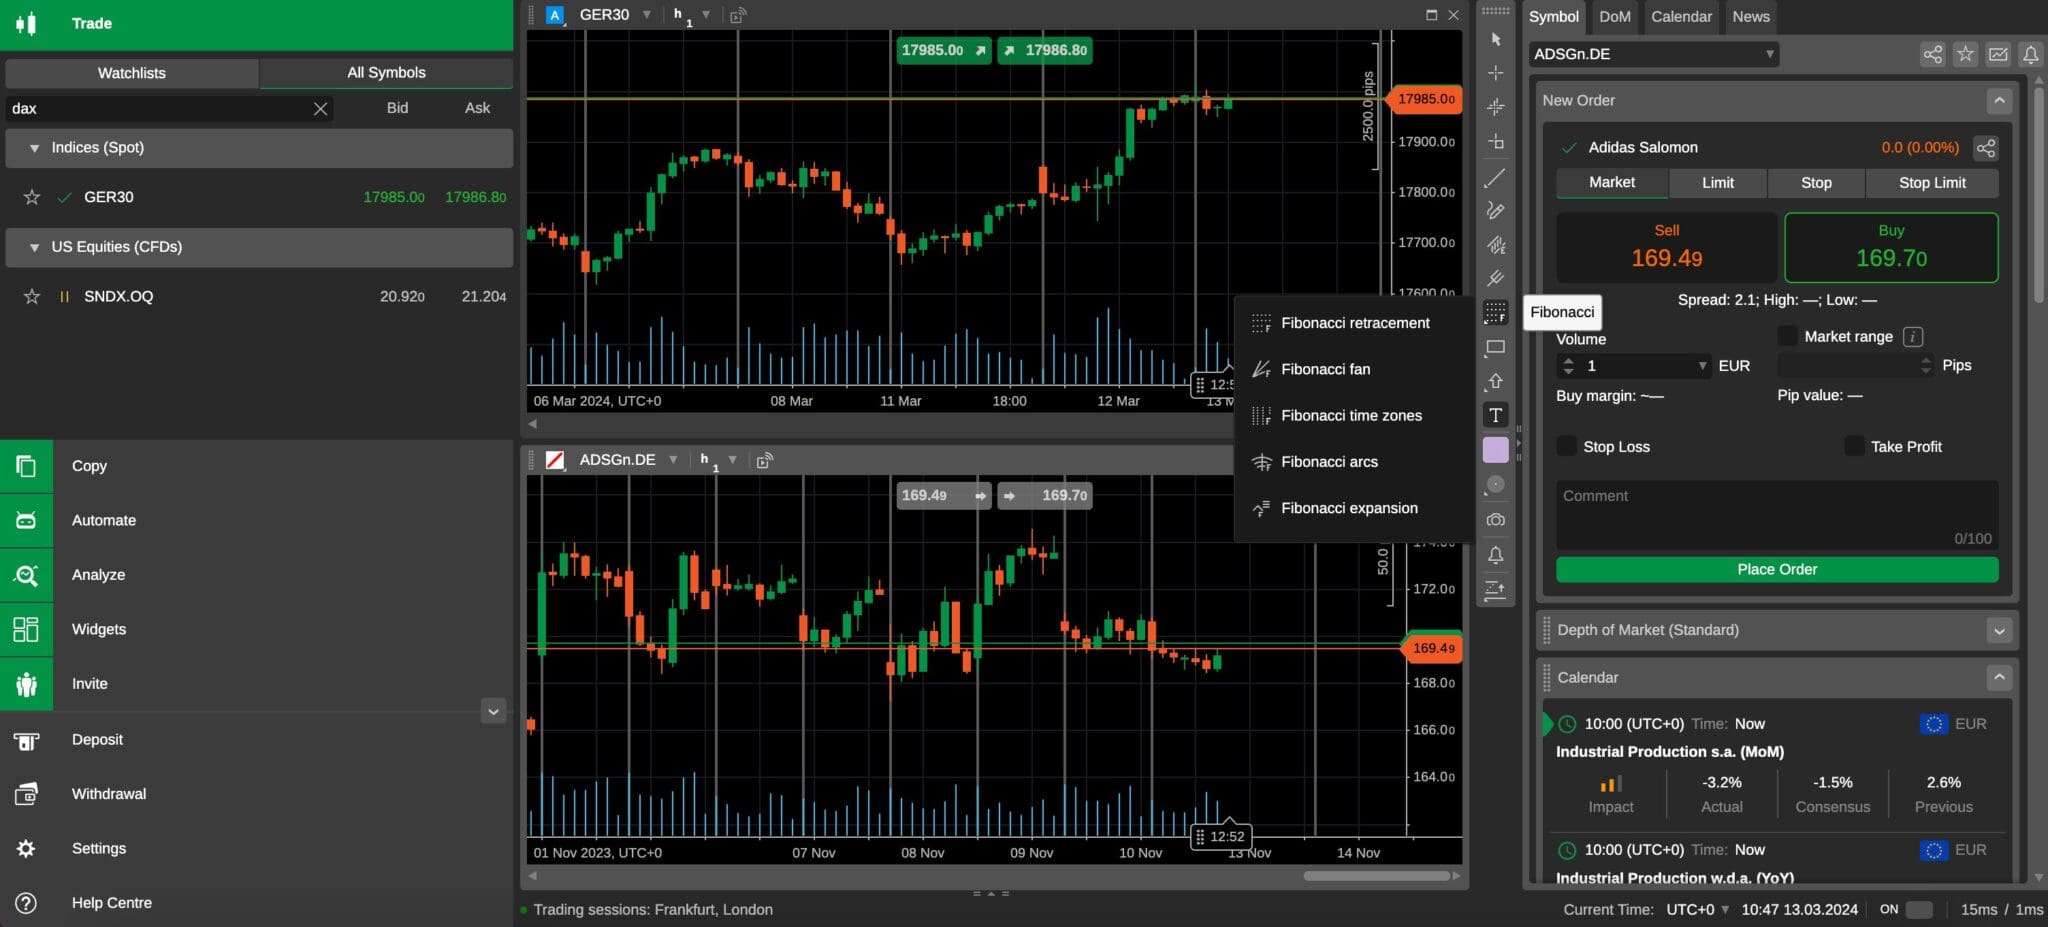 cTrader day trading platform at Blackbull Markets with German stock and Dax index